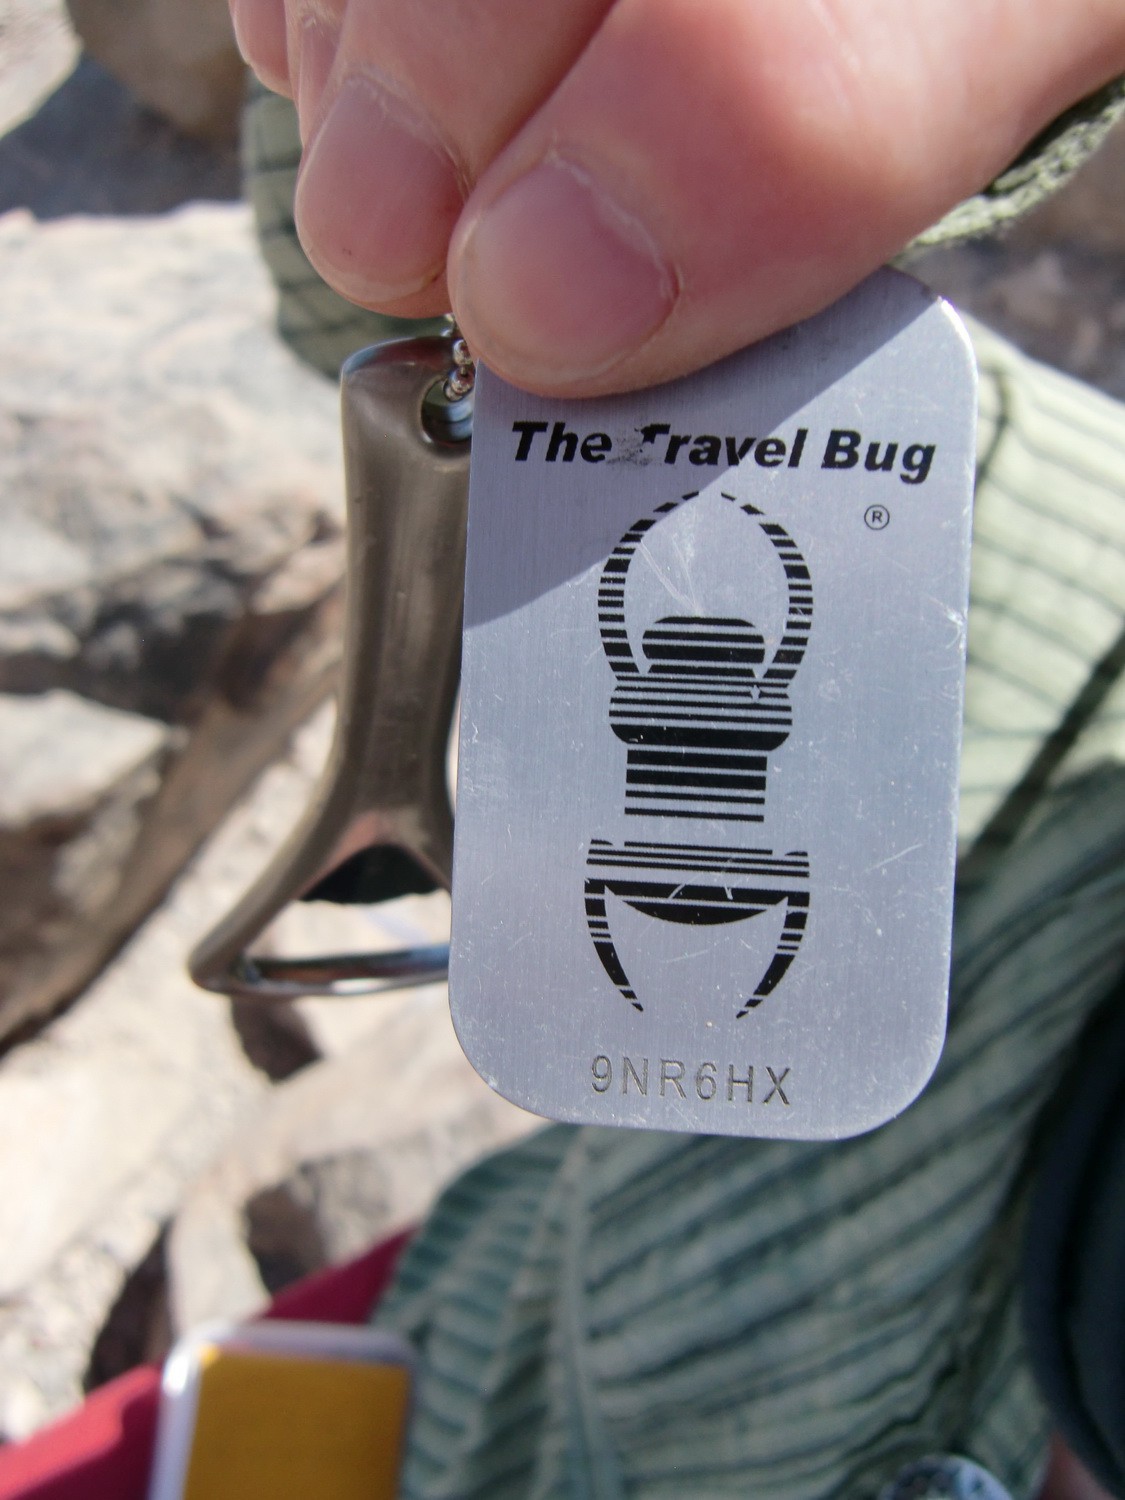 And a travel bug!